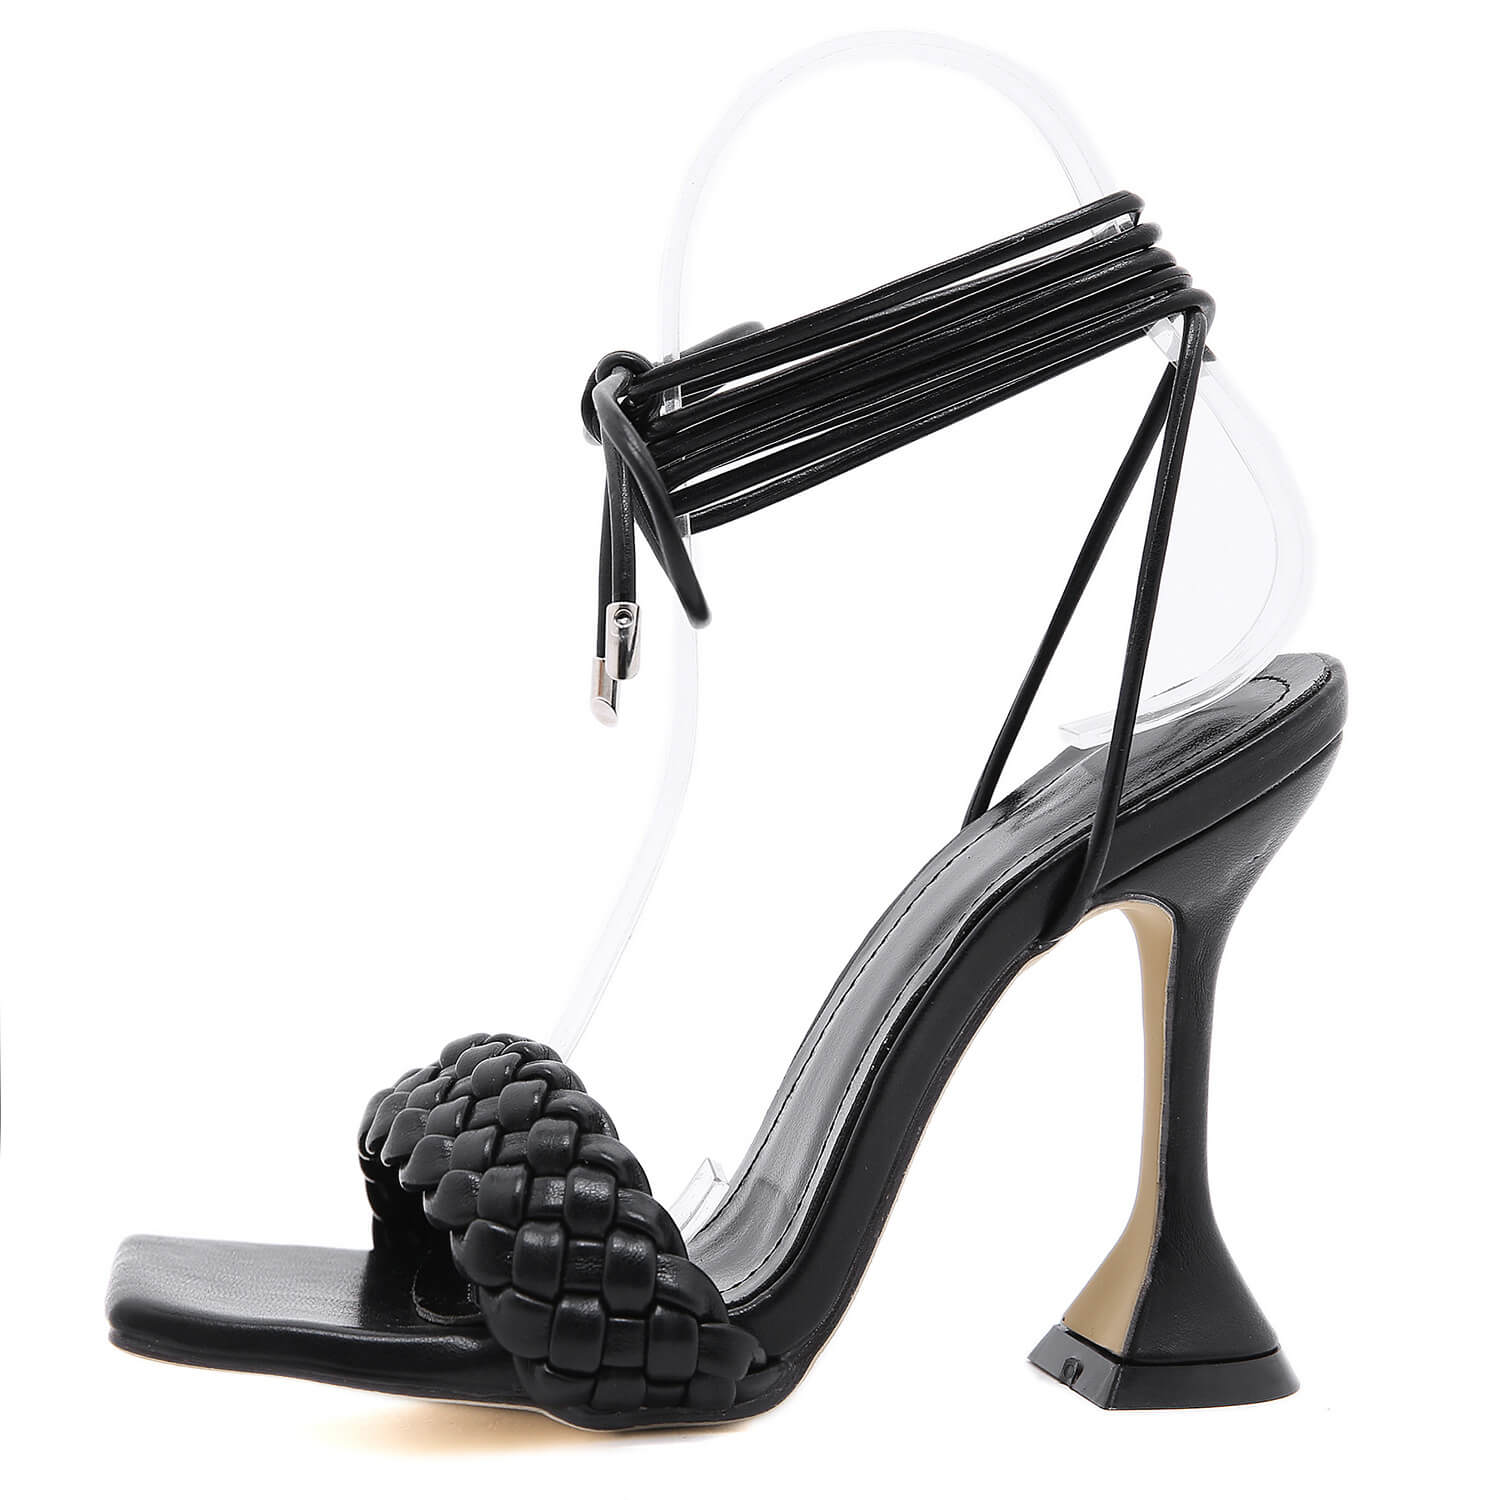 PU Square Toe Ankle Strap High Heel Sandals